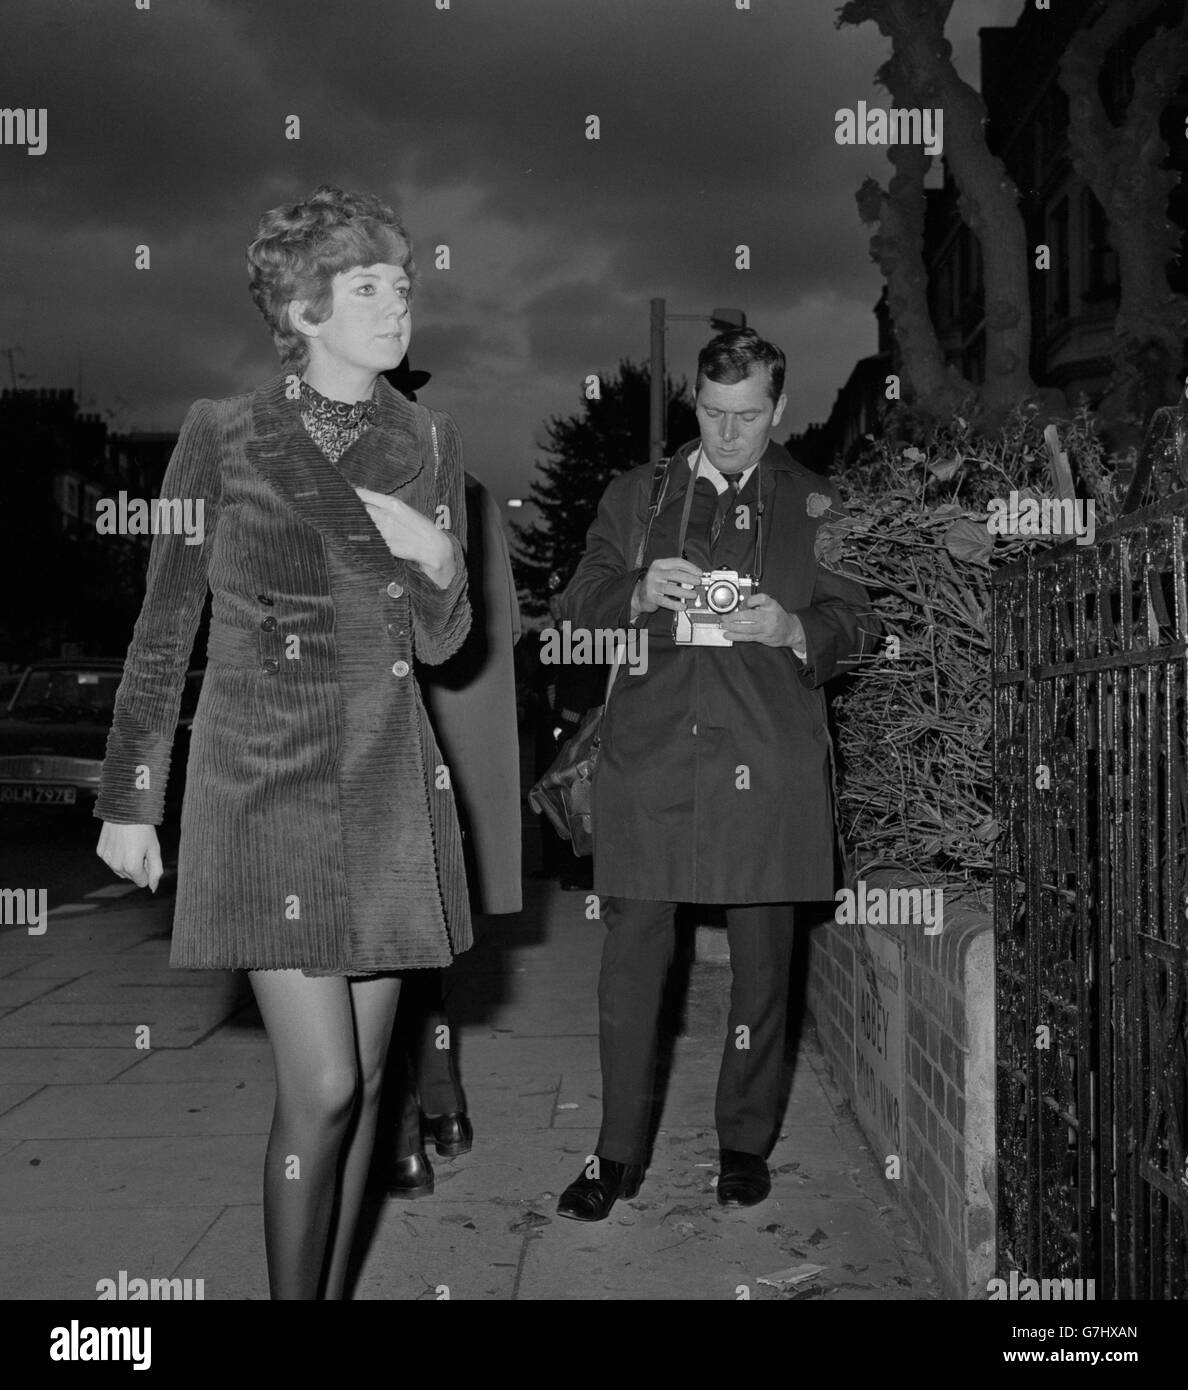 Pop singer Cilla Black arrives at the New London Synagogue in St John's Wood, London, to attend the memorial service to Brian Epstein, the man who managed many leading pop stars. Stock Photo